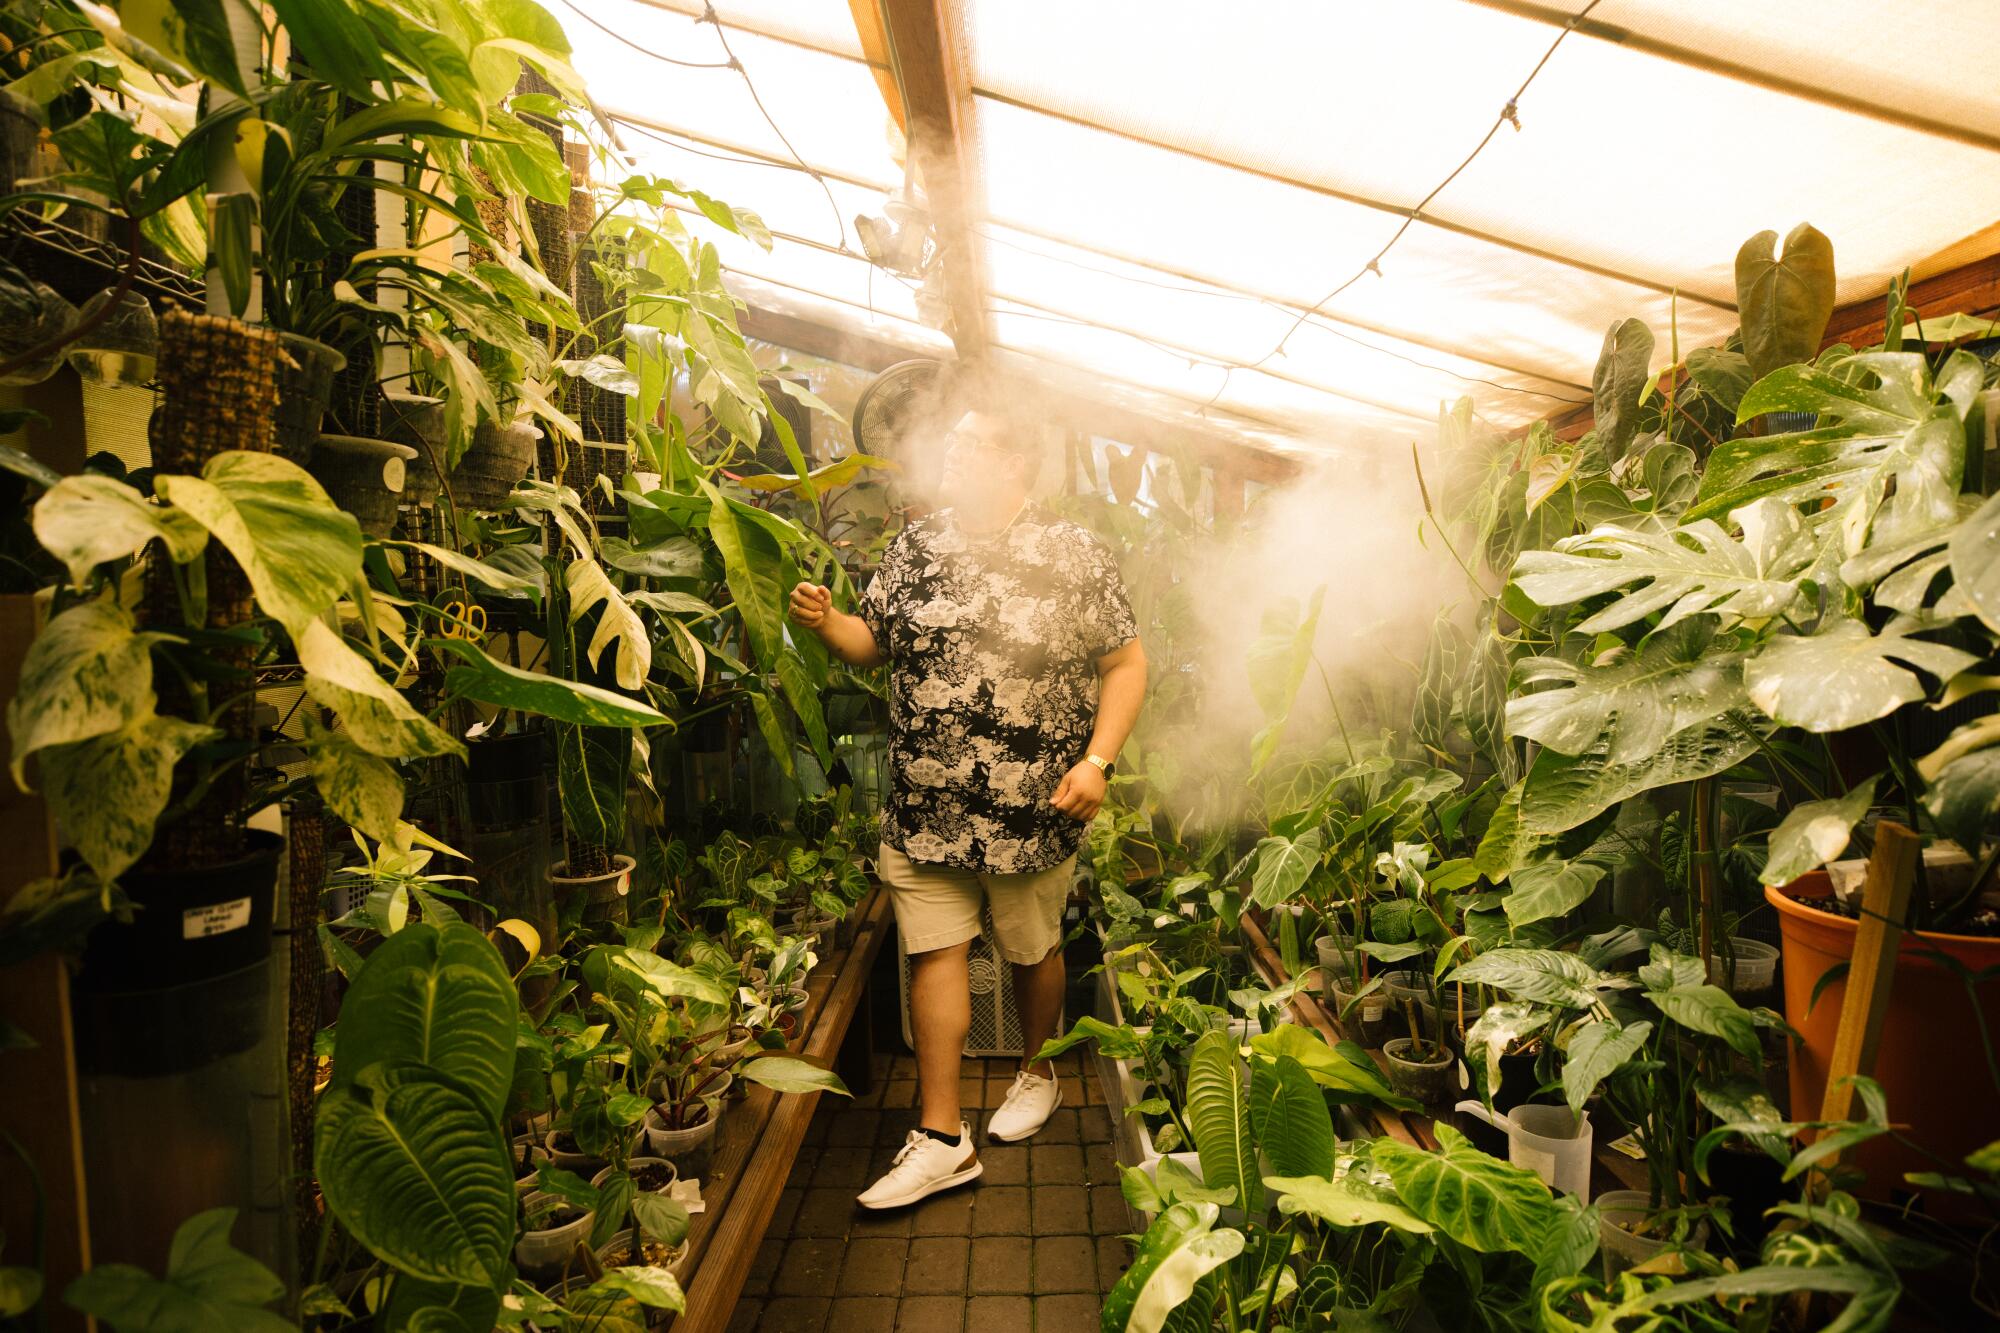 A man, his face obscured by mist, walking down the aisle of a greenhouse.